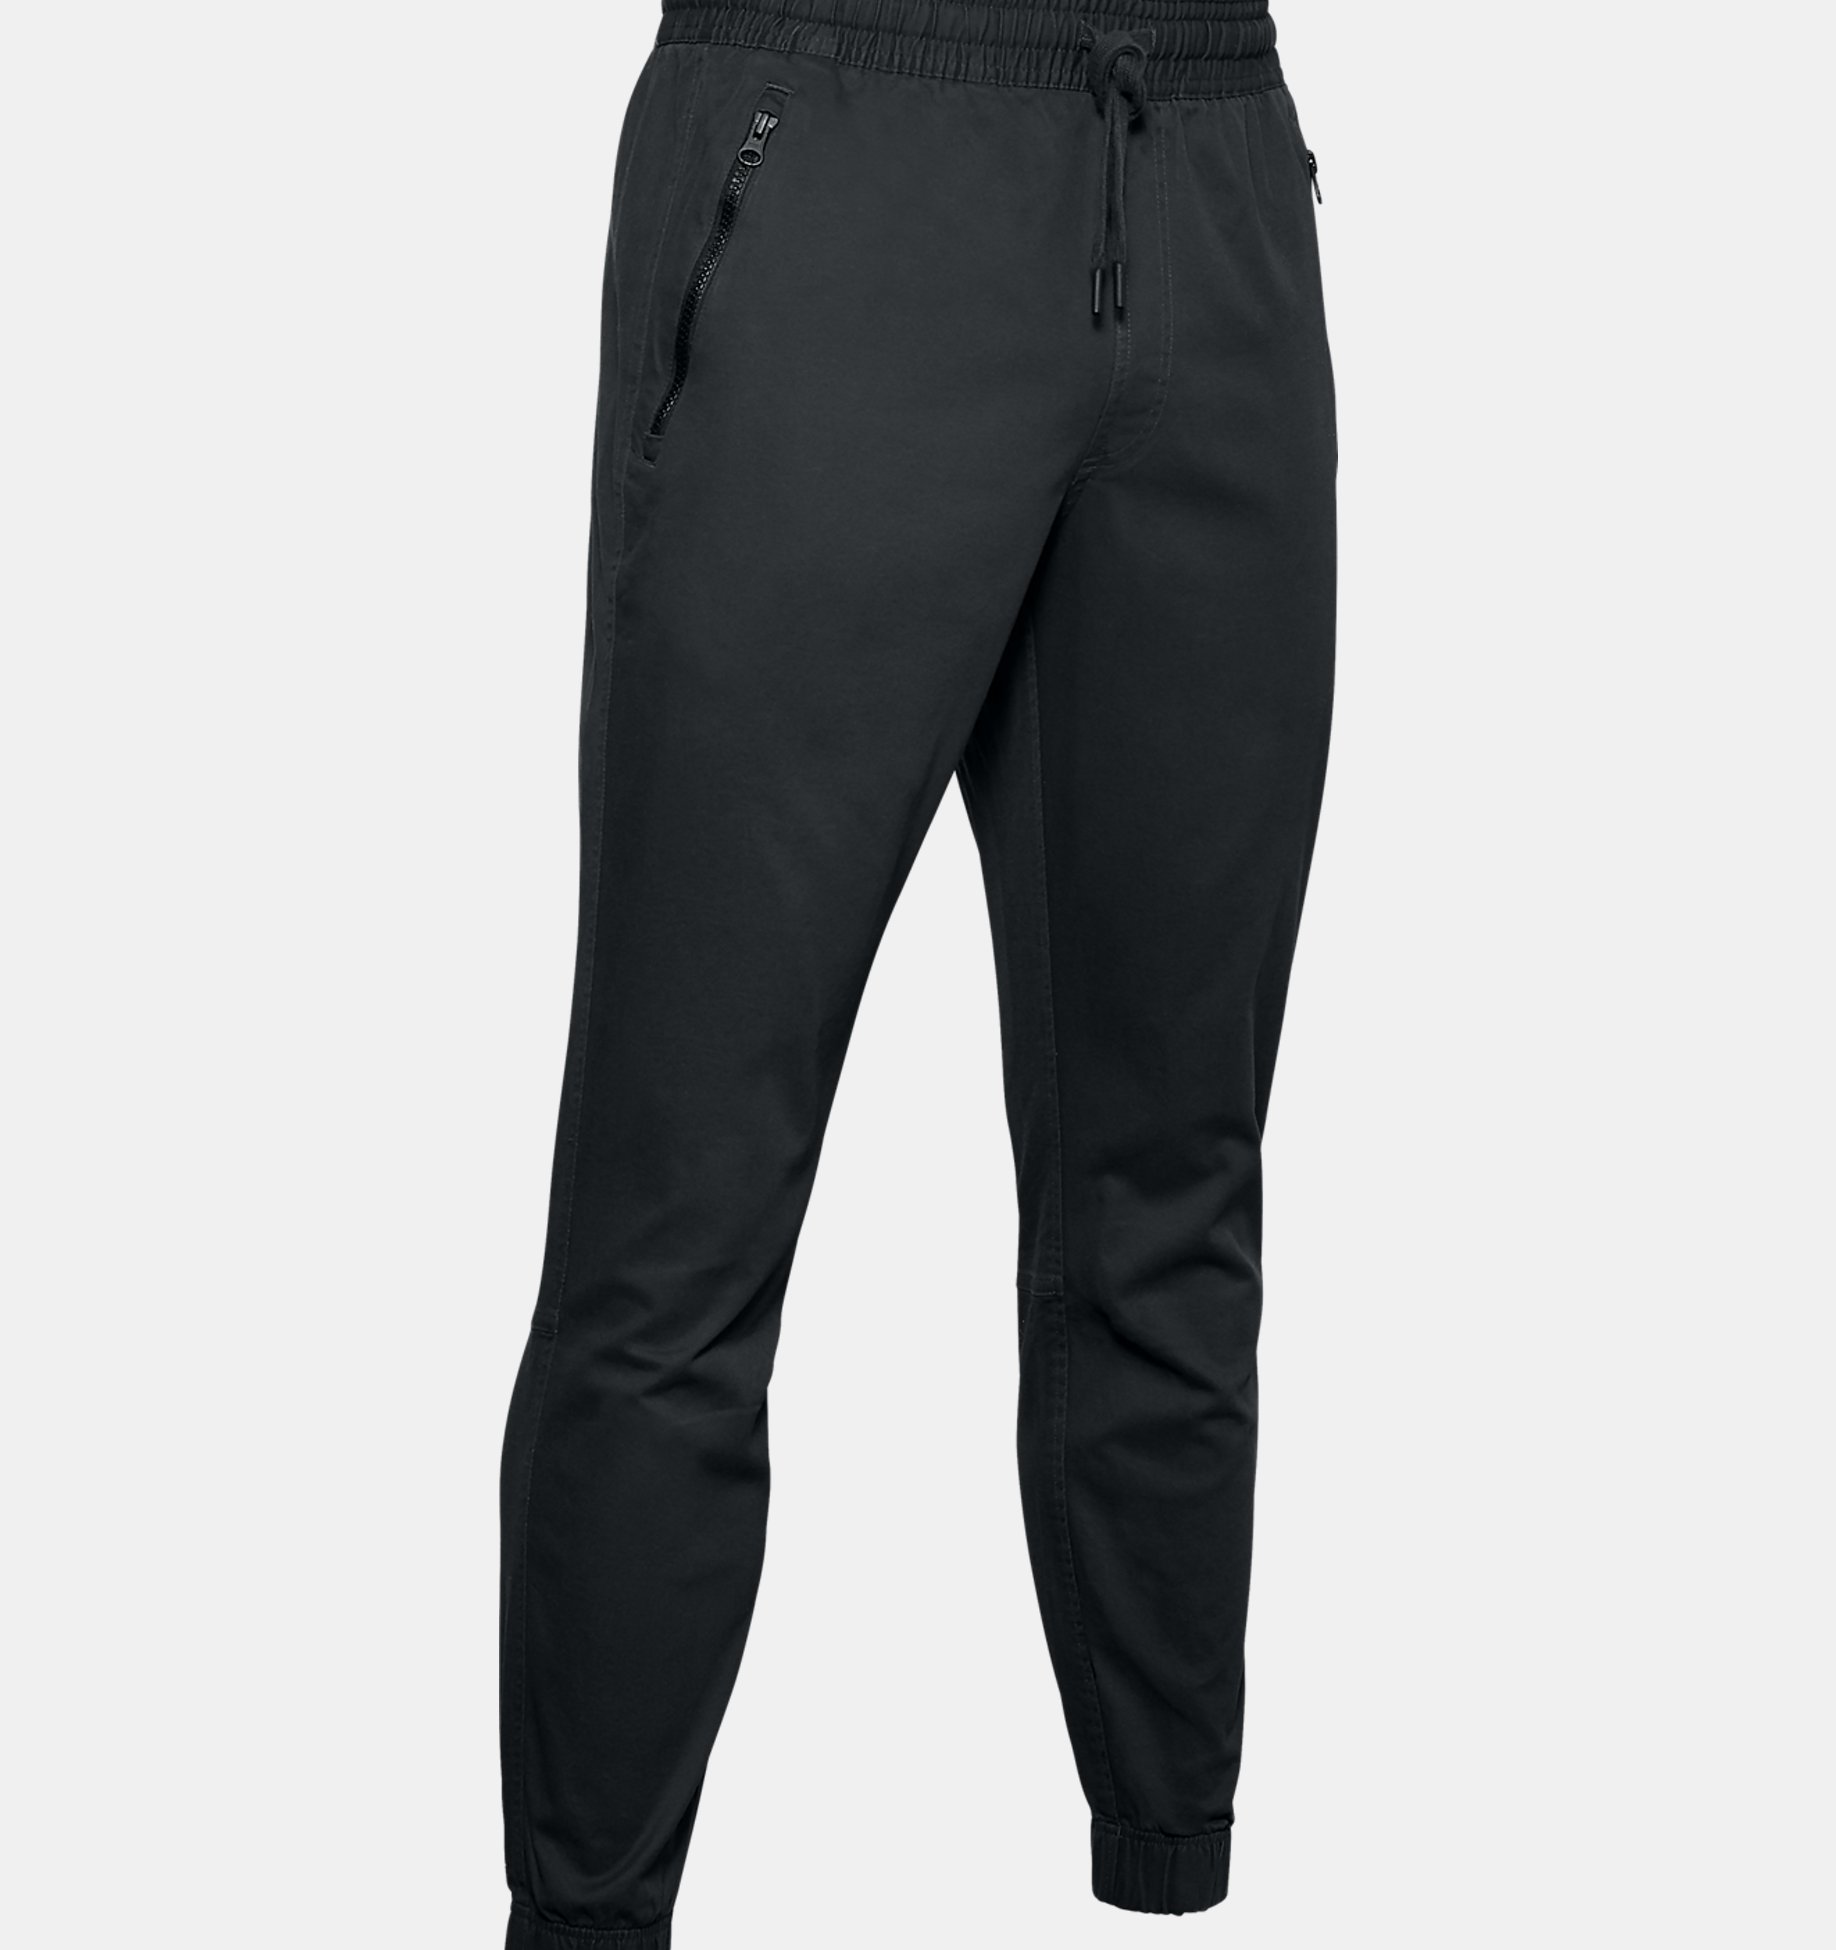 Under Armour Mens Performance Chino Jogger Shorts 